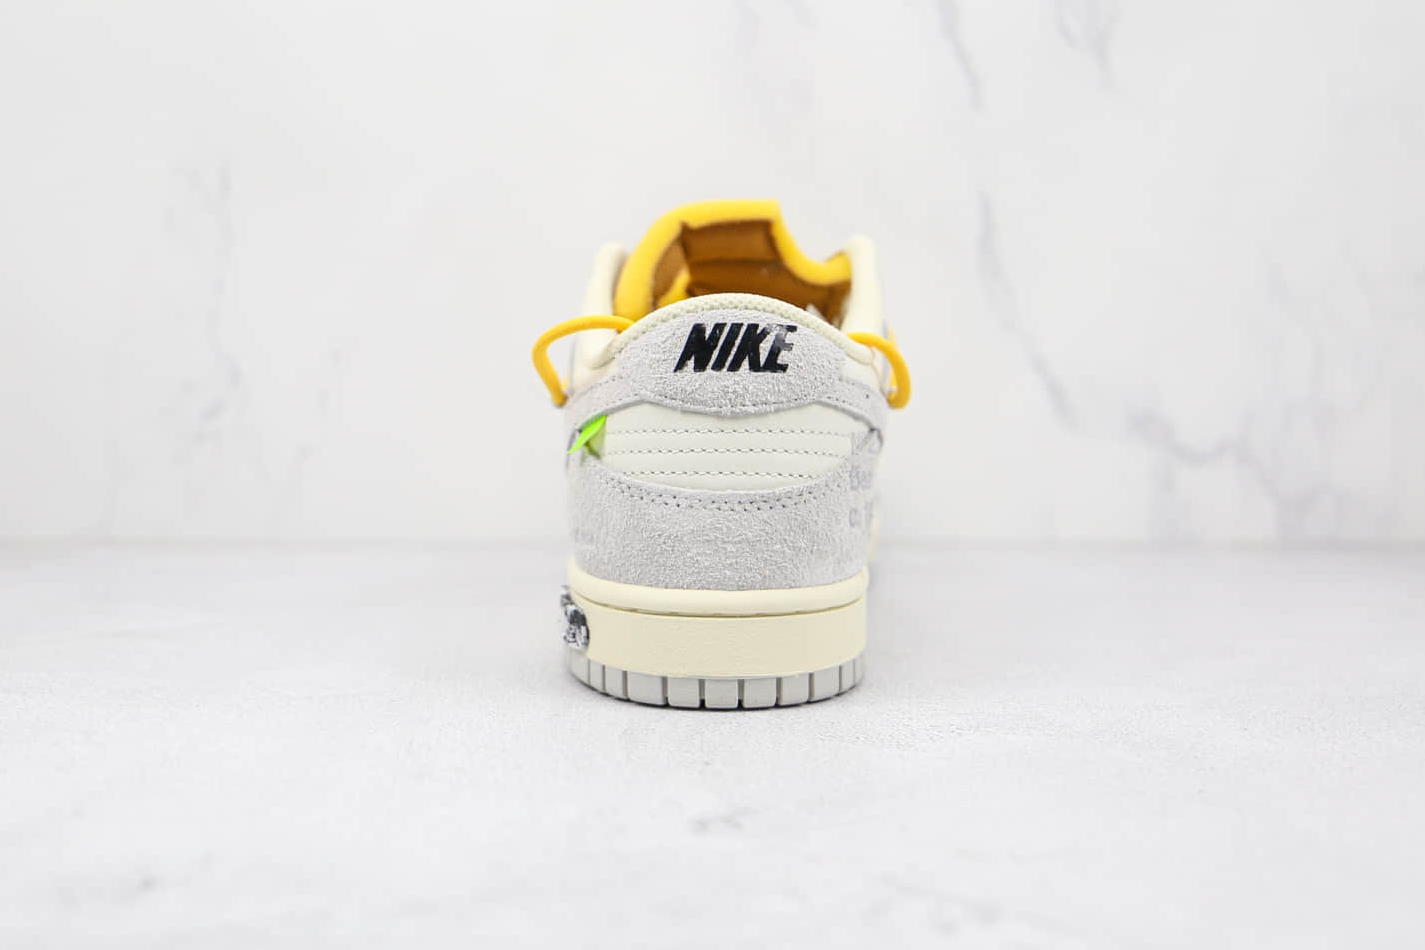 Nike Off-White x Dunk Low 'Lot 39 of 50' DJ0950-109 - Limited Edition Collaboration Sneakers